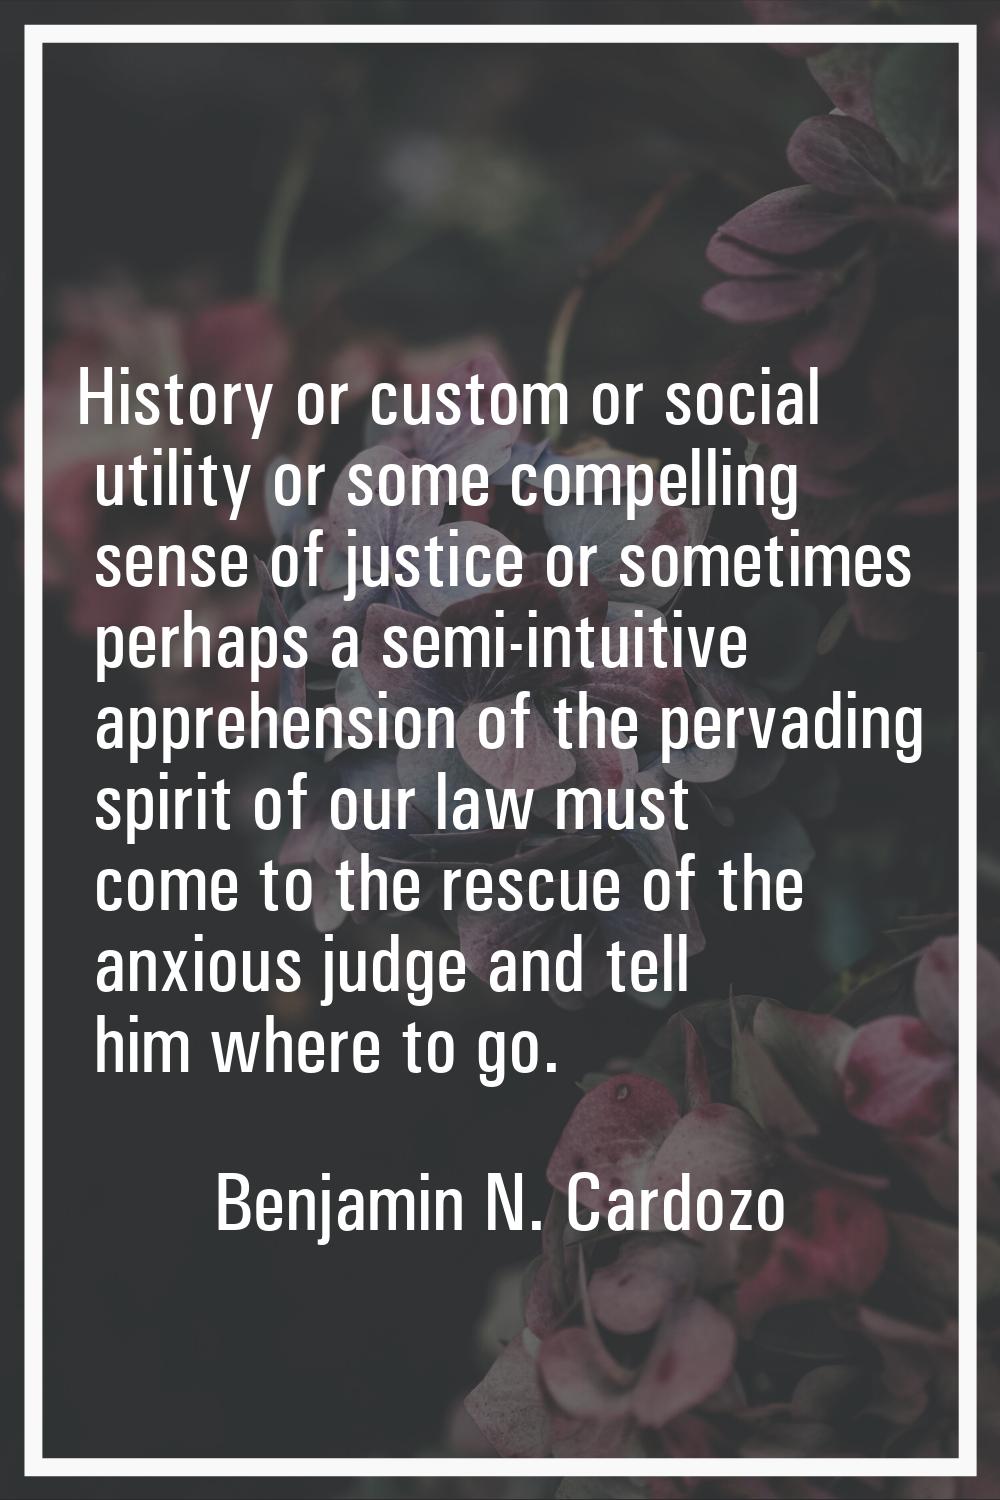 History or custom or social utility or some compelling sense of justice or sometimes perhaps a semi